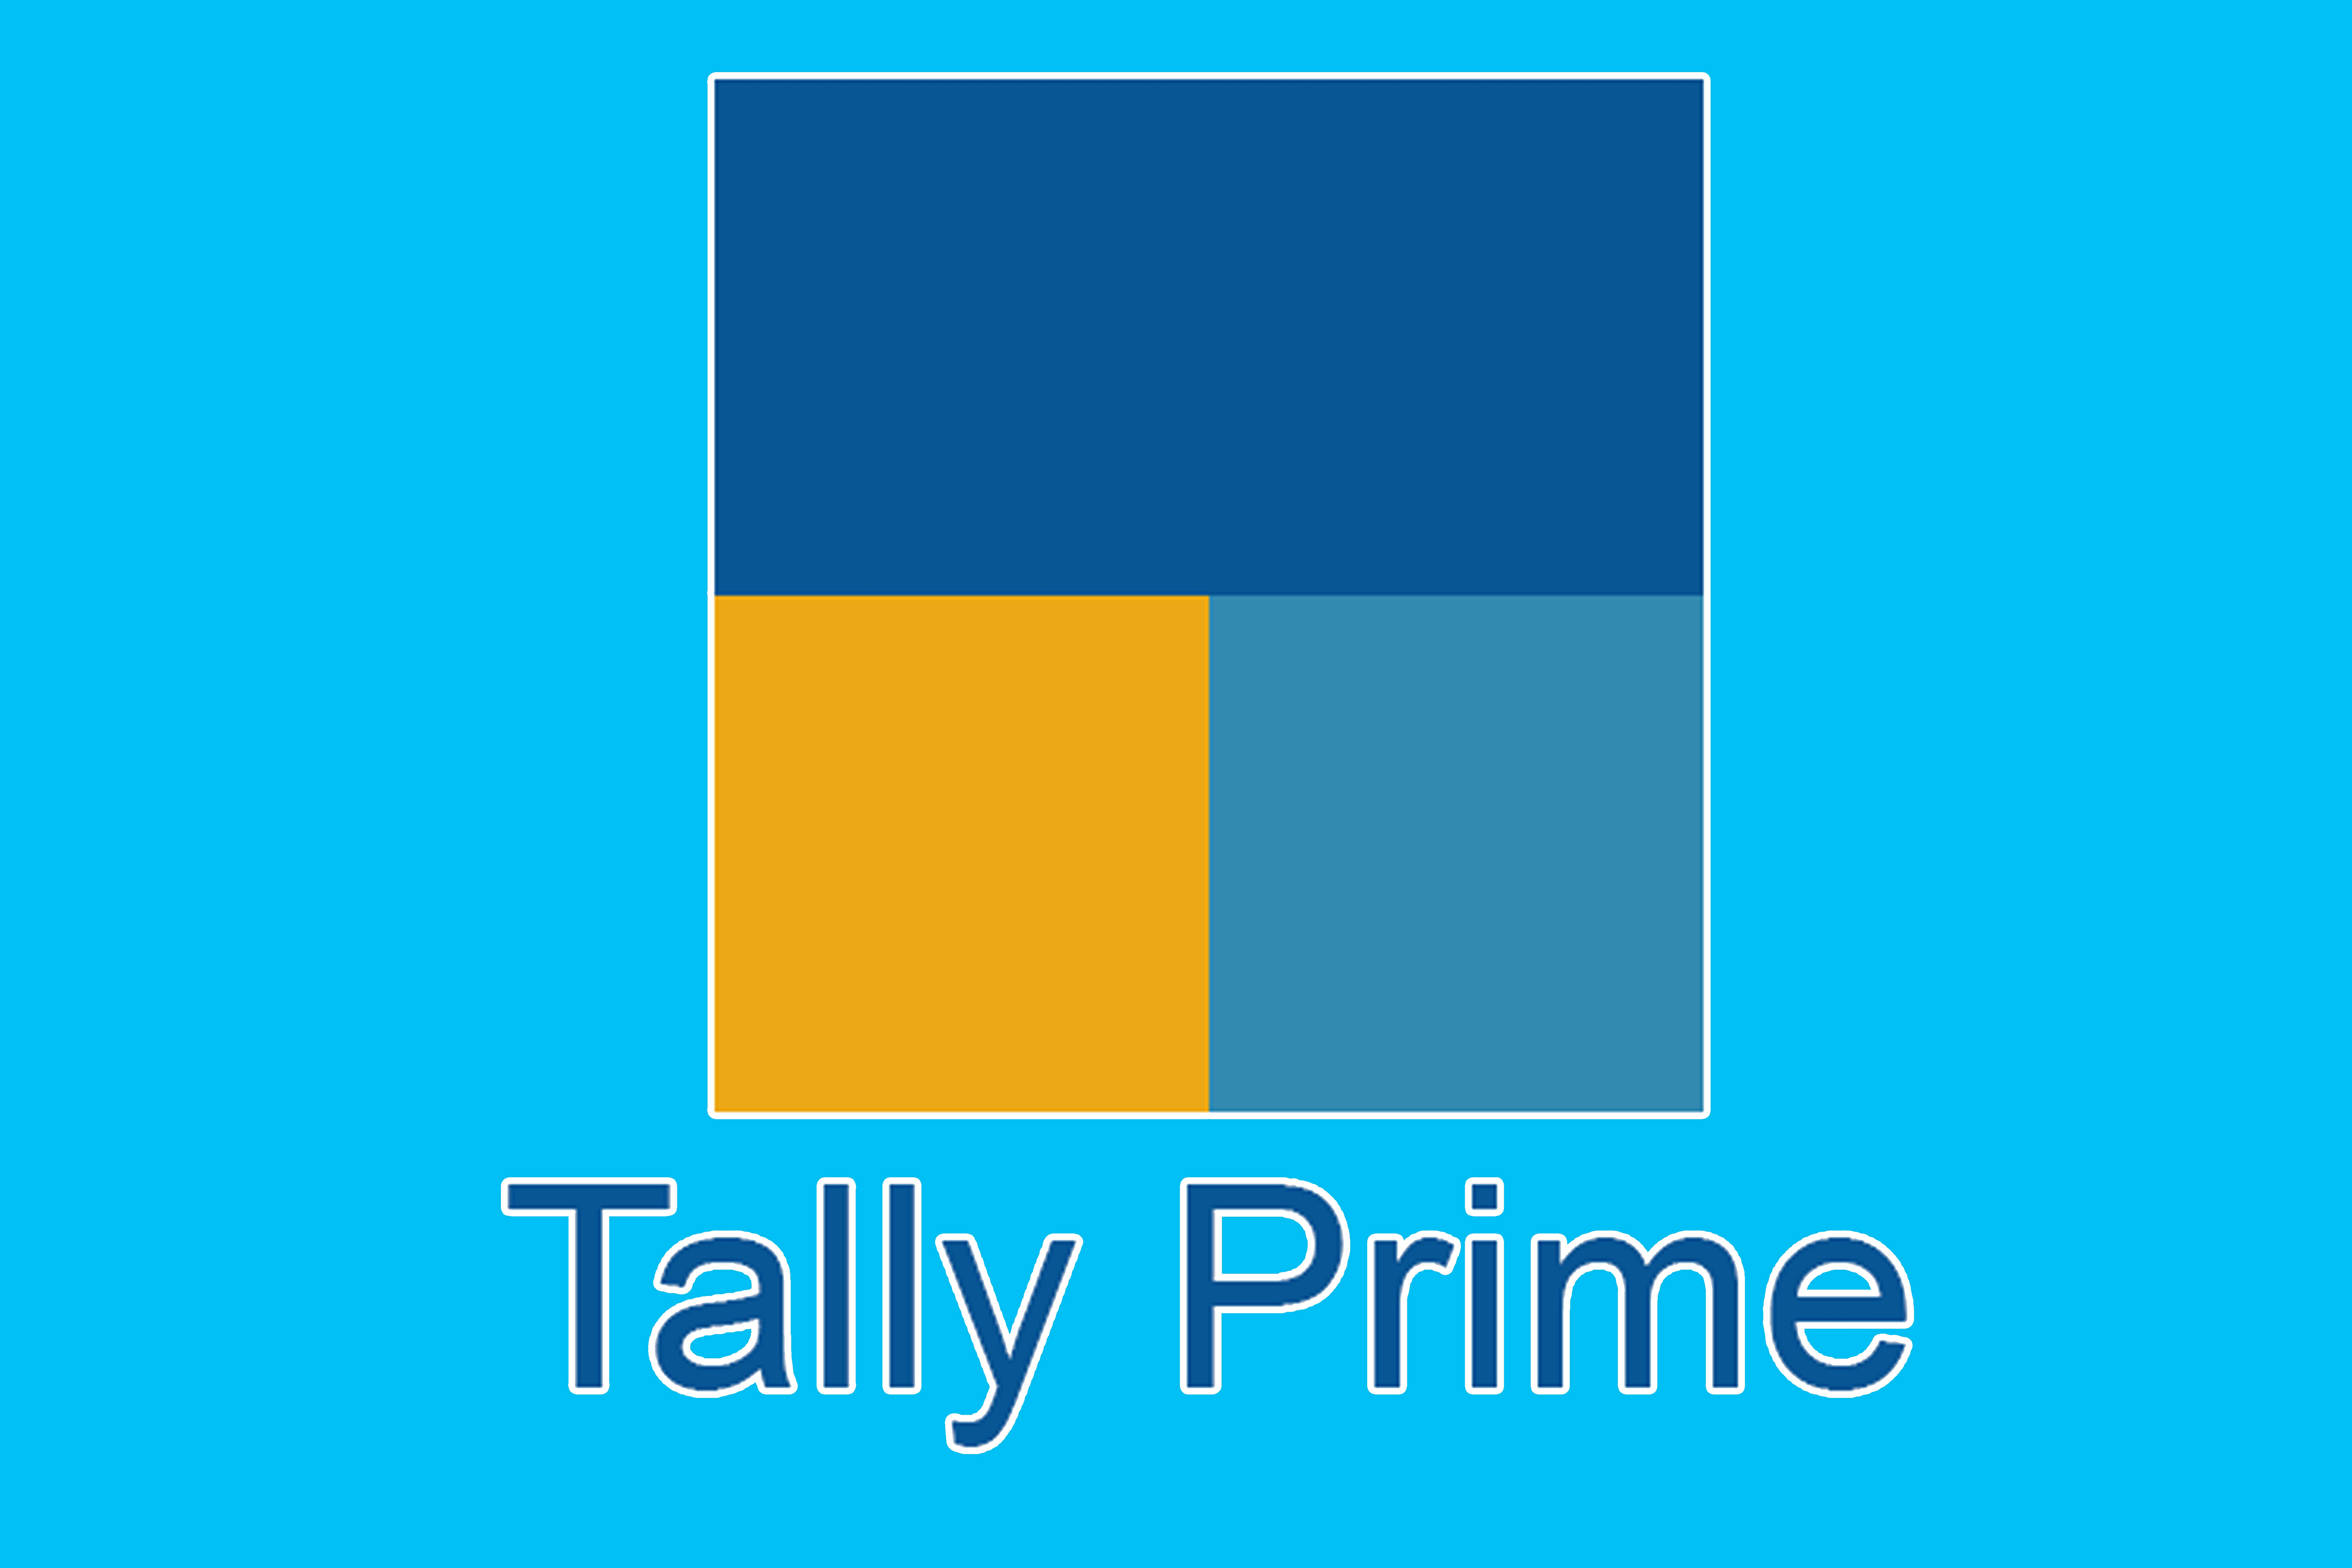 Tally Prime with GST